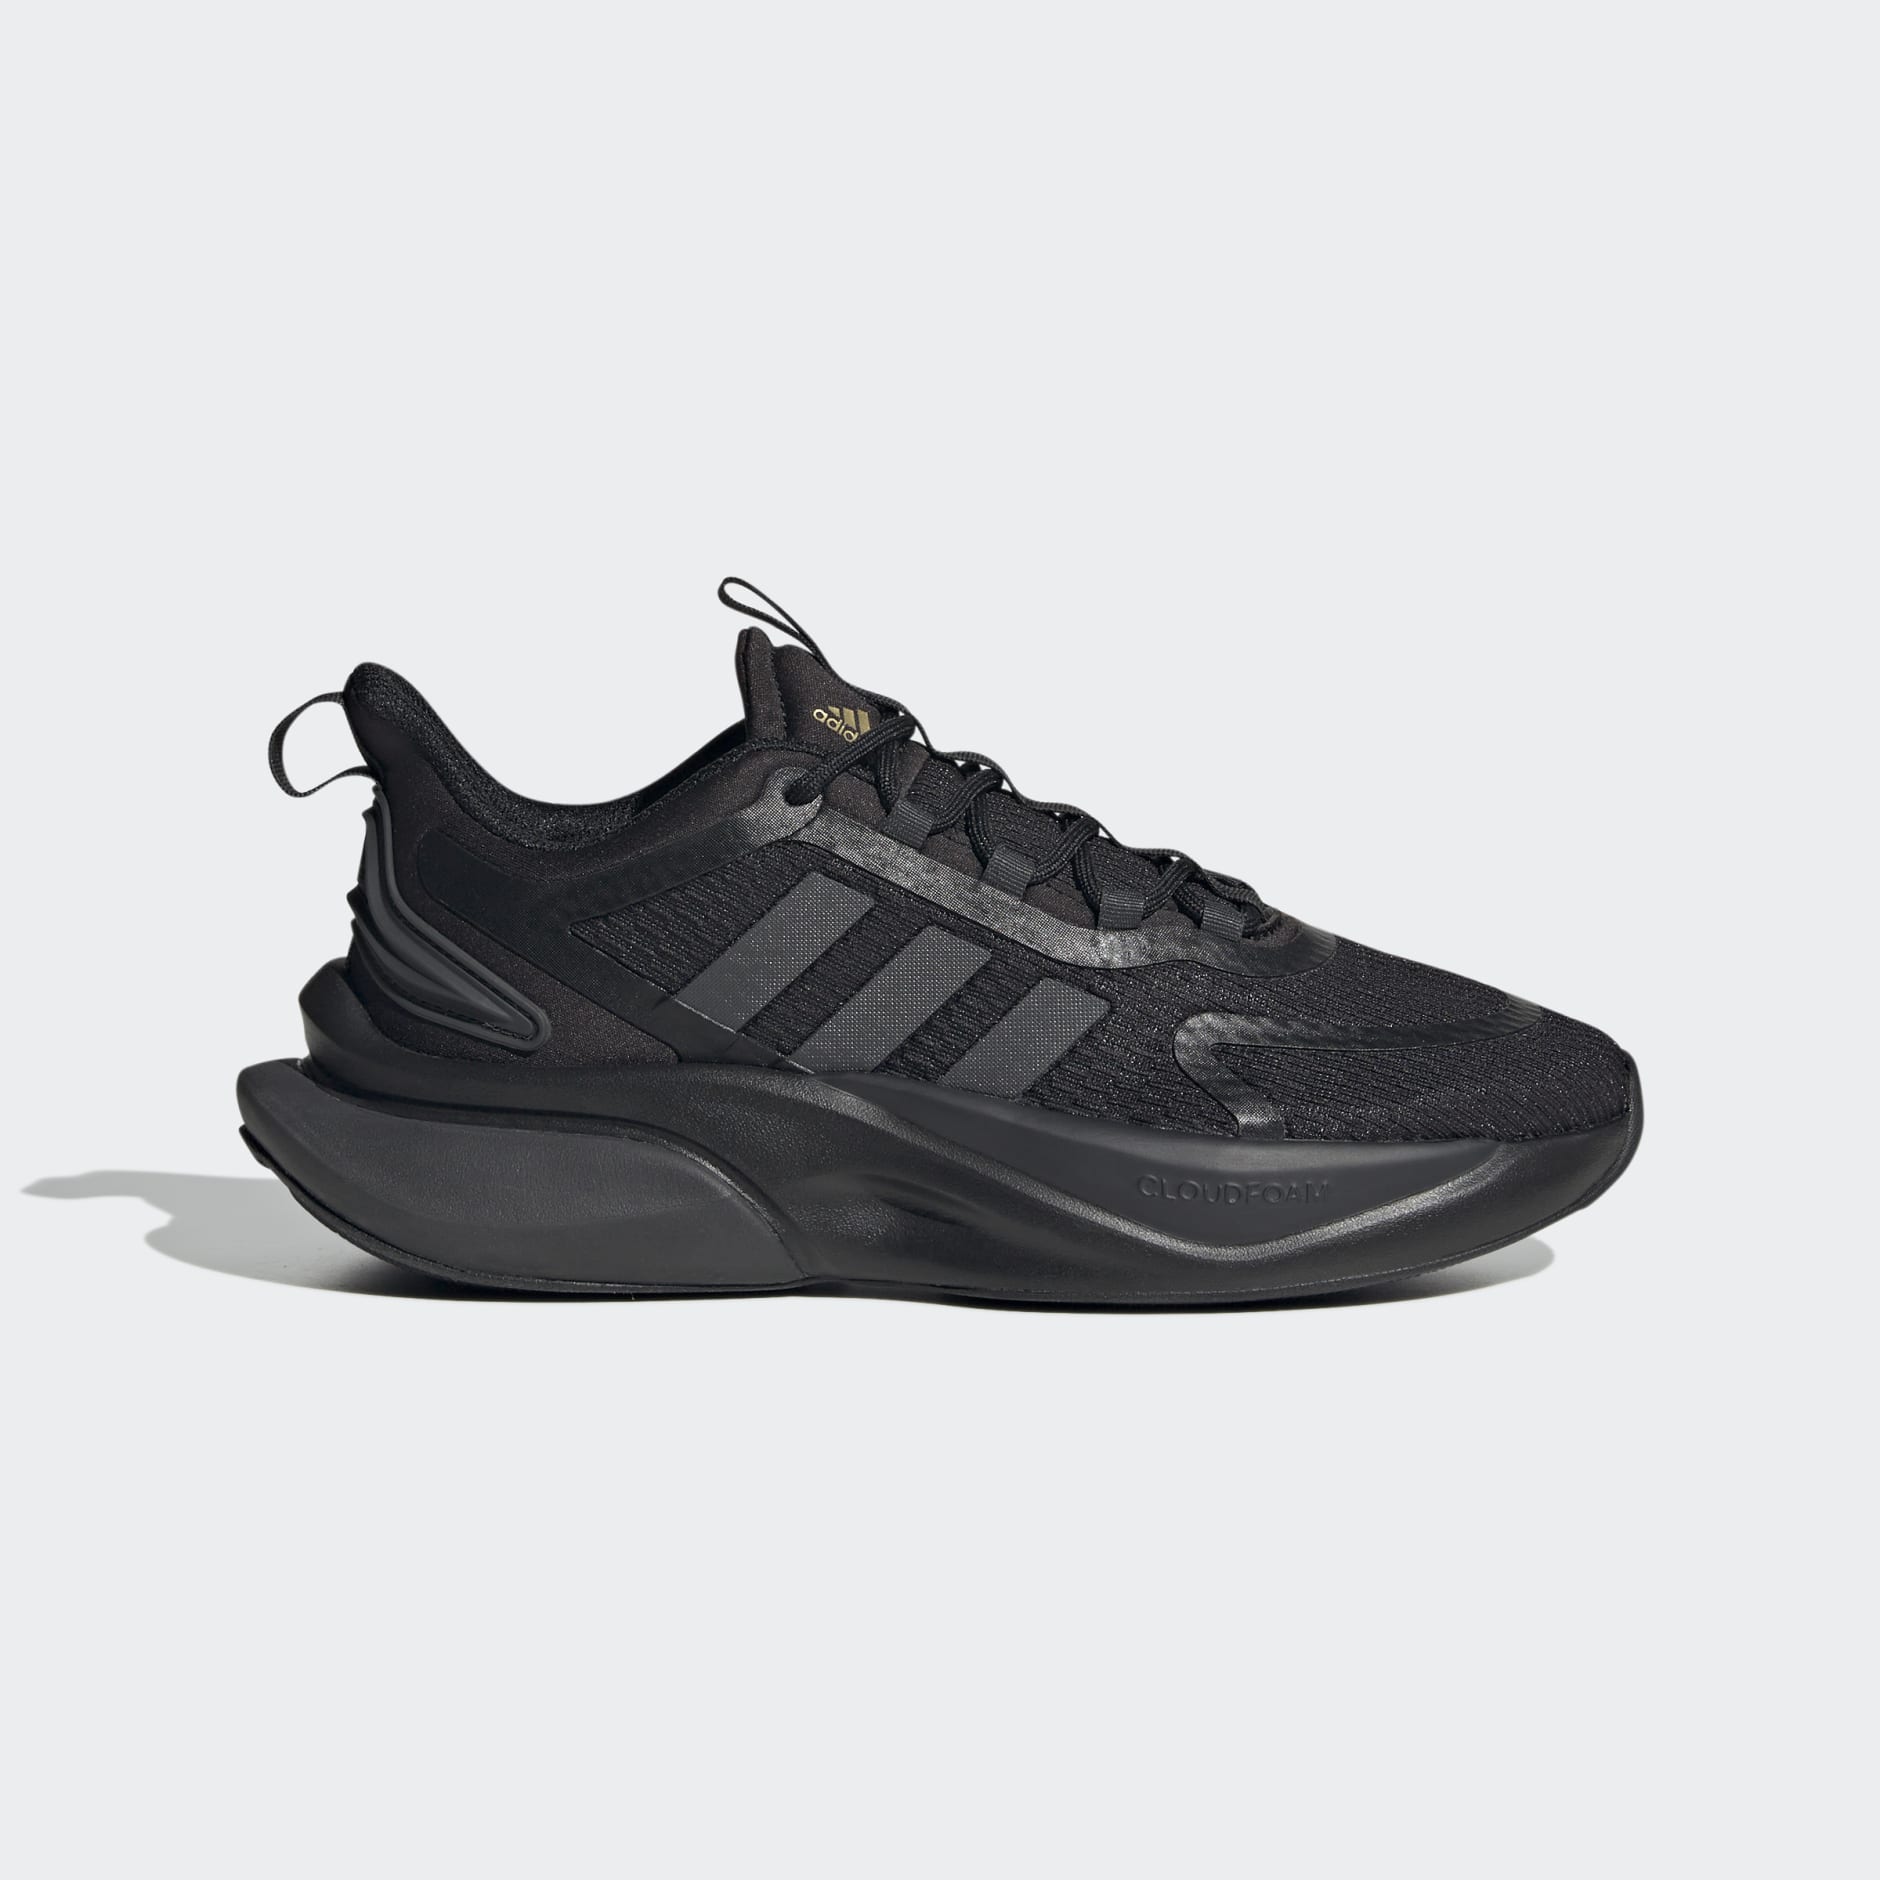 adidas Alphabounce+ Sustainable Bounce Shoes - Black